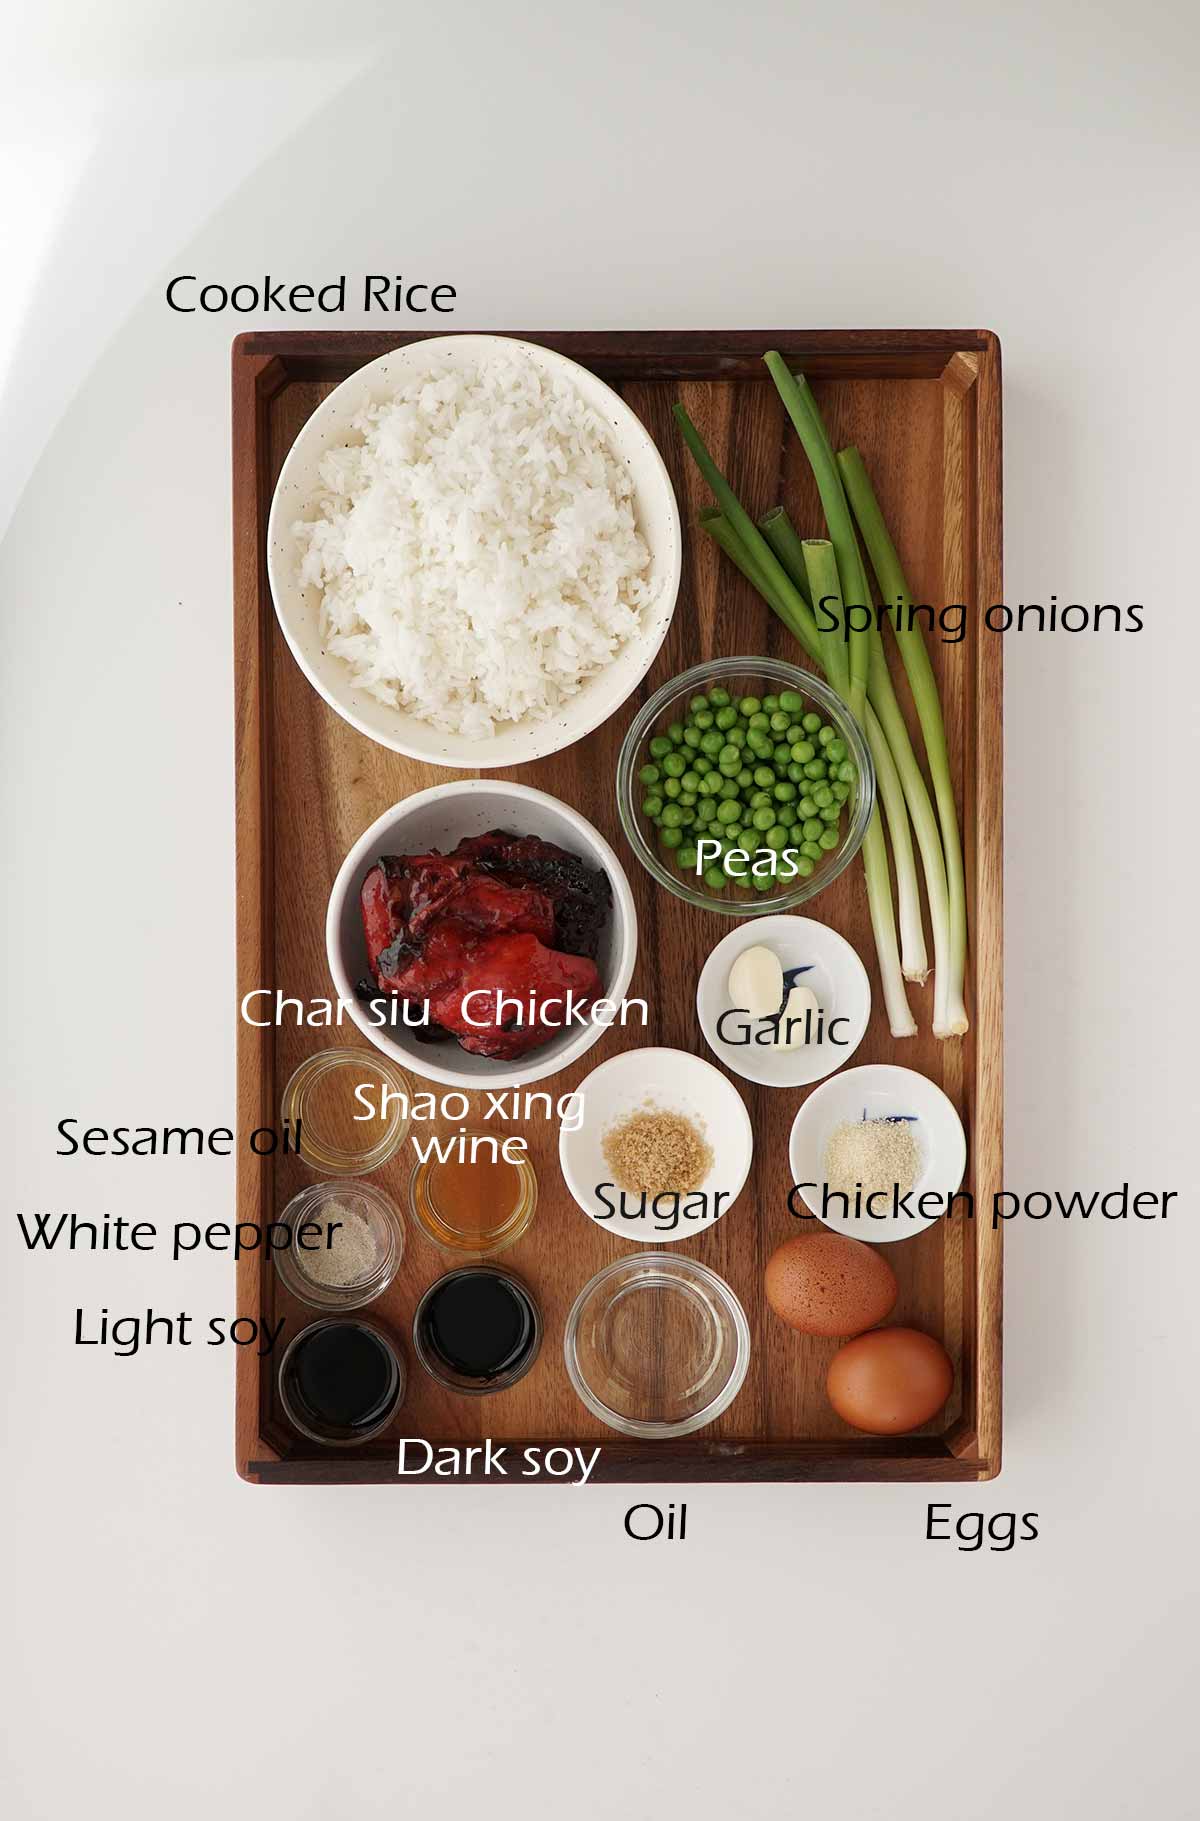 Labelled ingredients displayed on the wooden tray. 